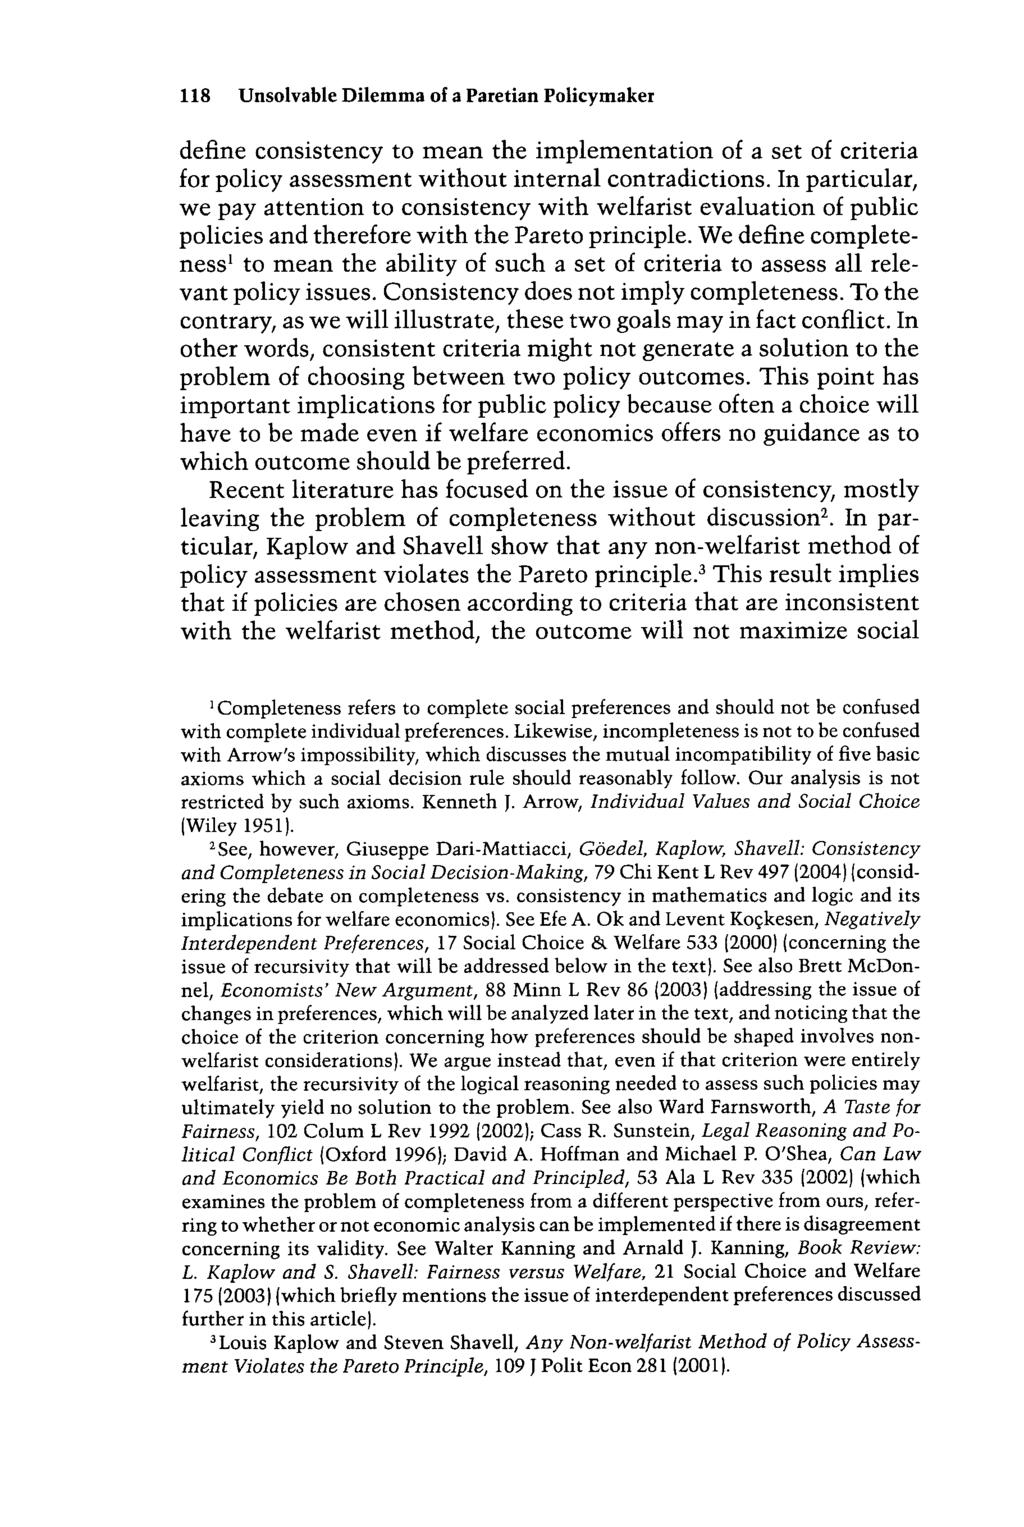 118 Unsolvable Dilemma of a Paretian Policymaker define consistency to mean the implementation of a set of criteria for policy assessment without internal contradictions.